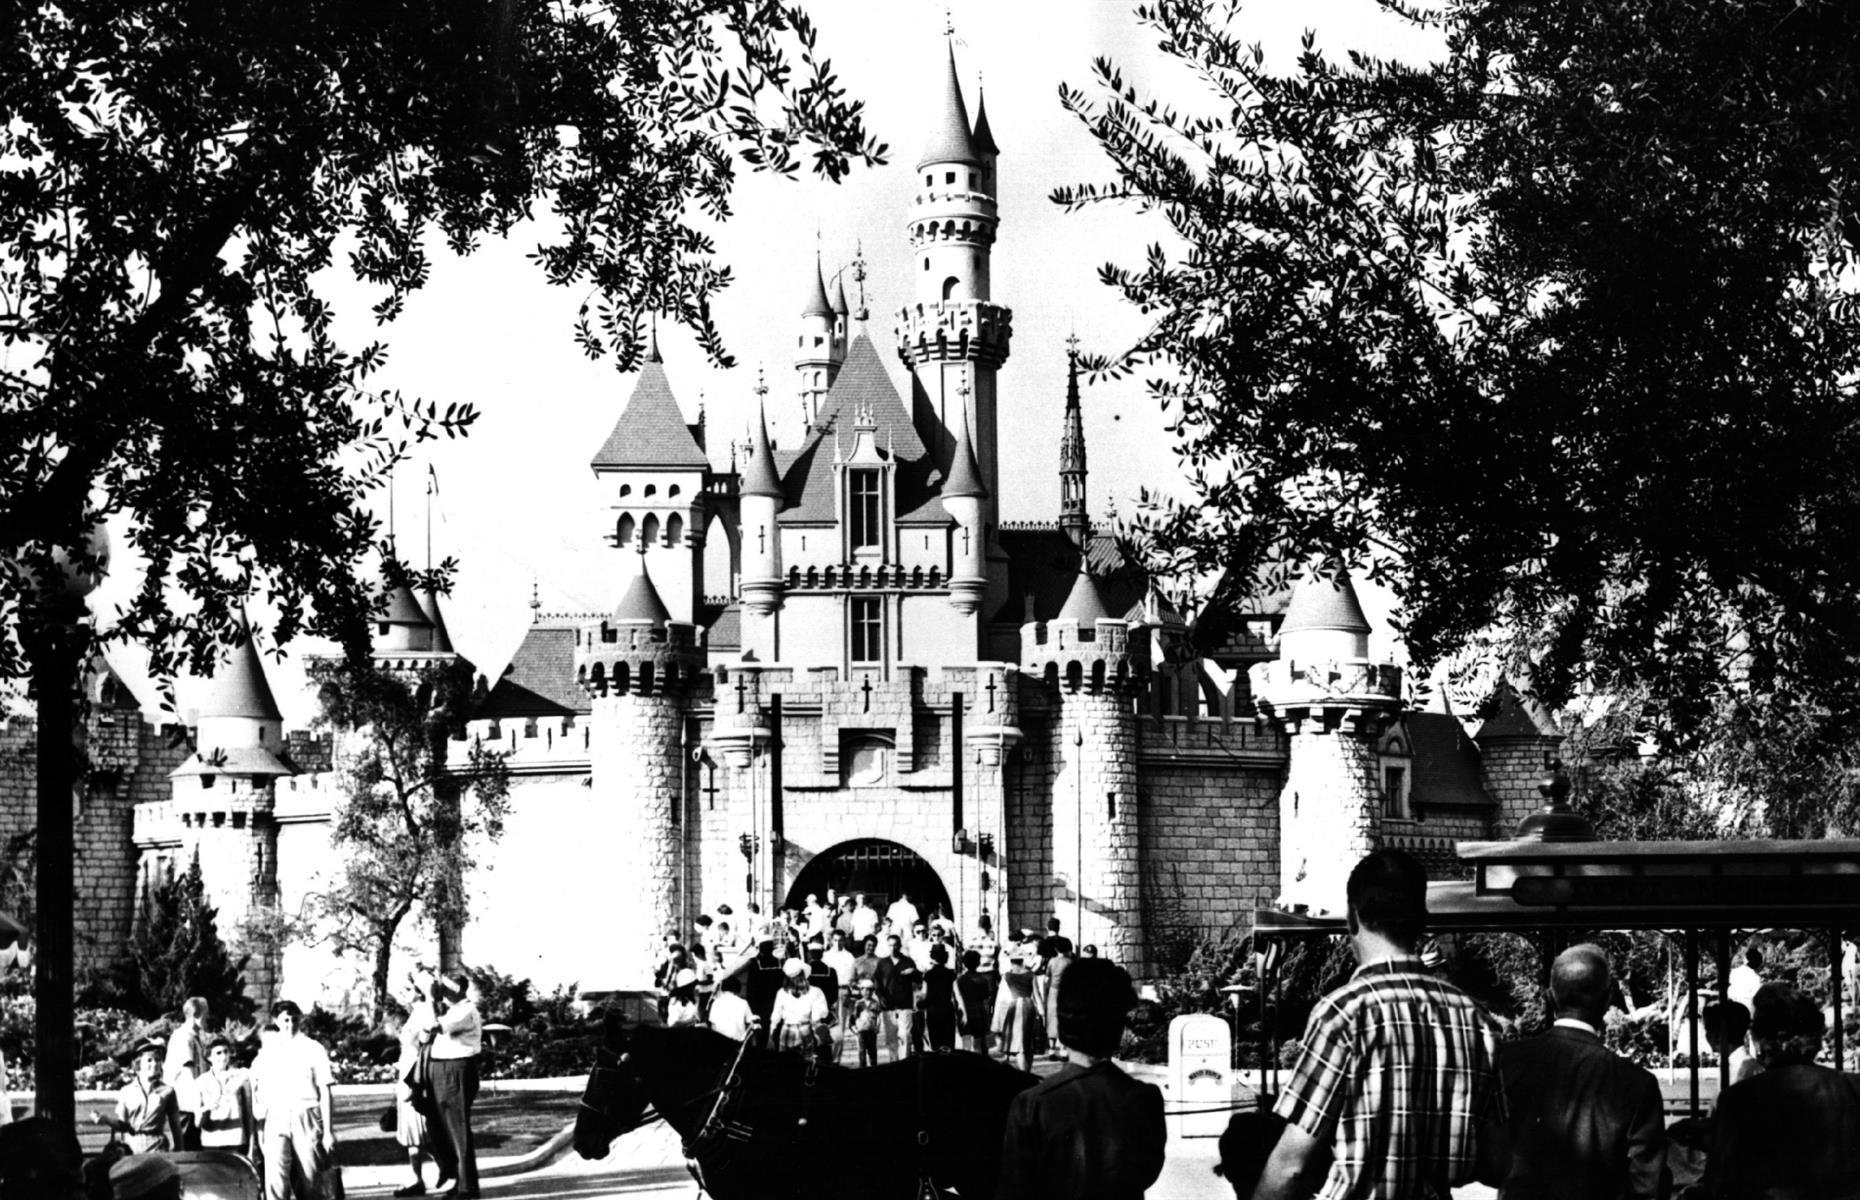 <p>Take a trip back in time to see historic images of some of the USA’s most popular tourist attractions from the 1900s until the 1990s. Some are long gone while others are still popular today.</p>